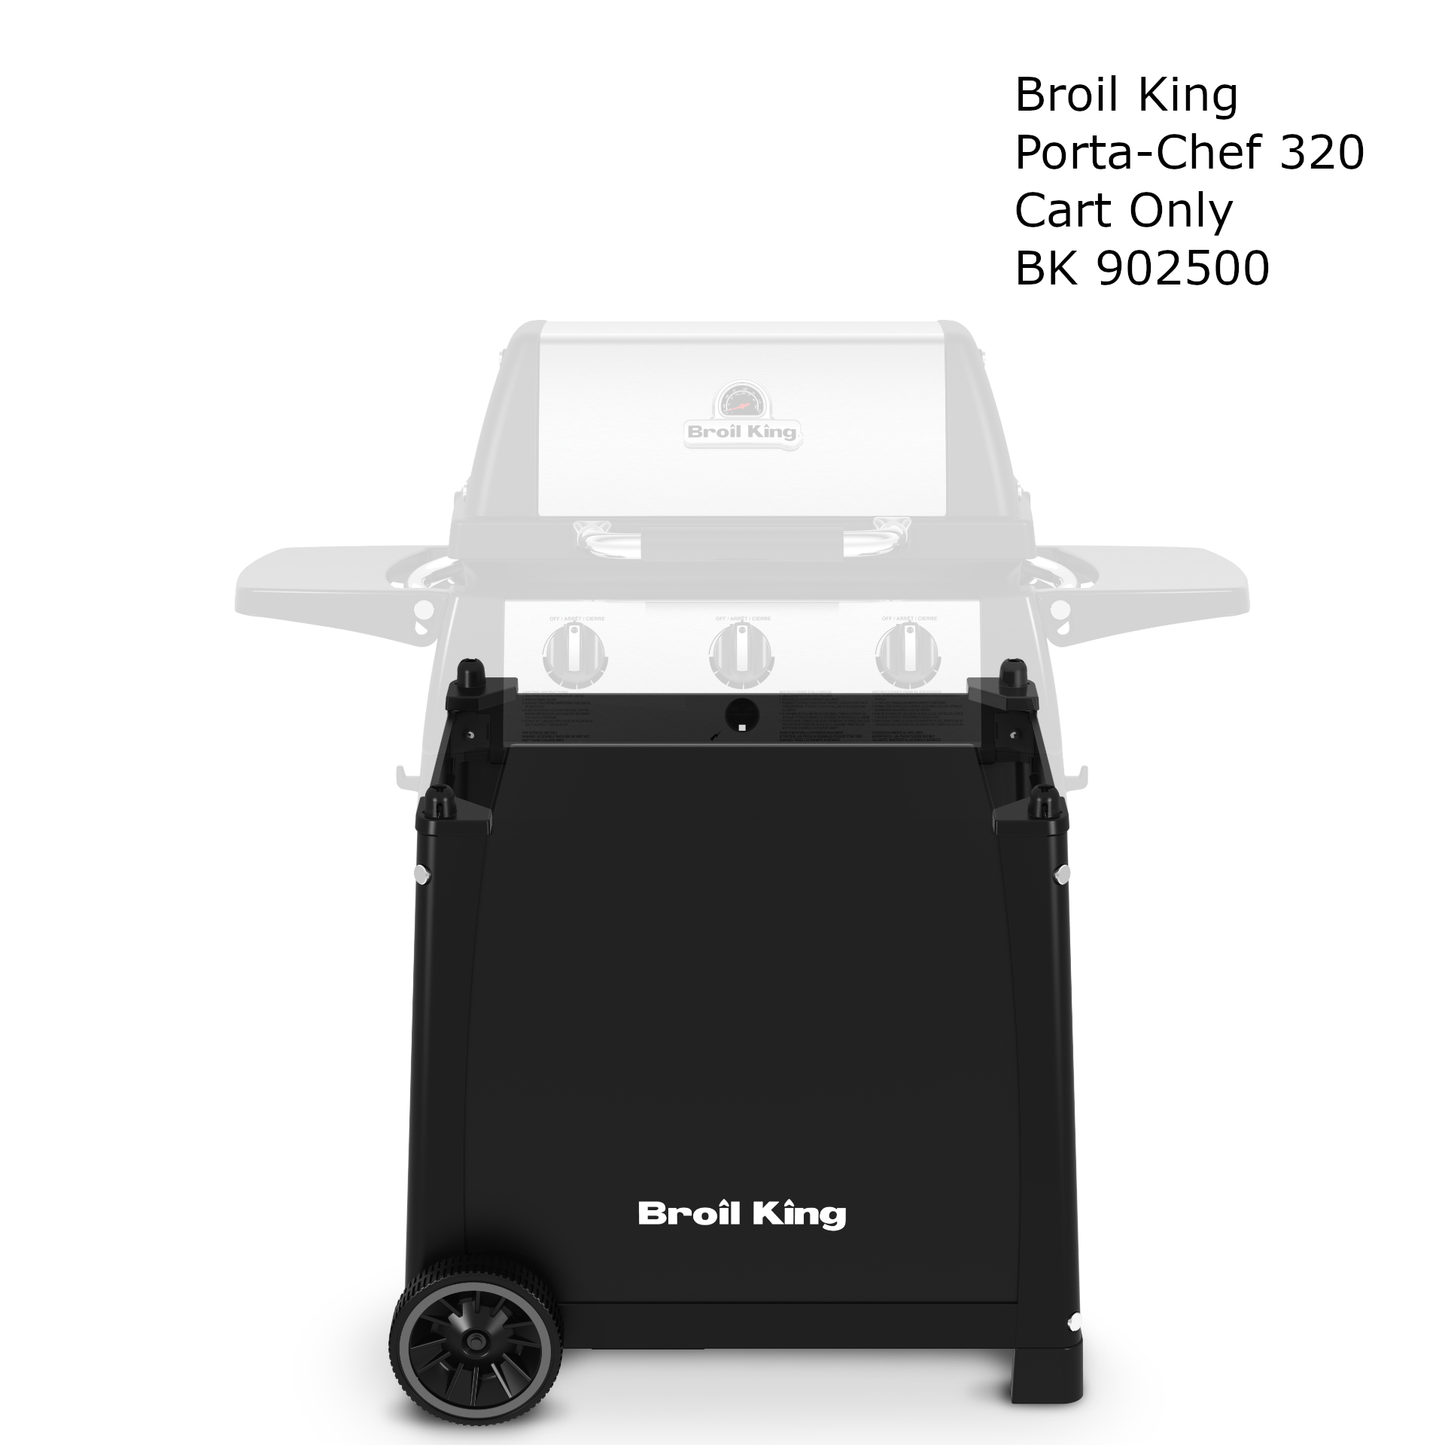 Broil King Porta-Chef 320, Cart Only